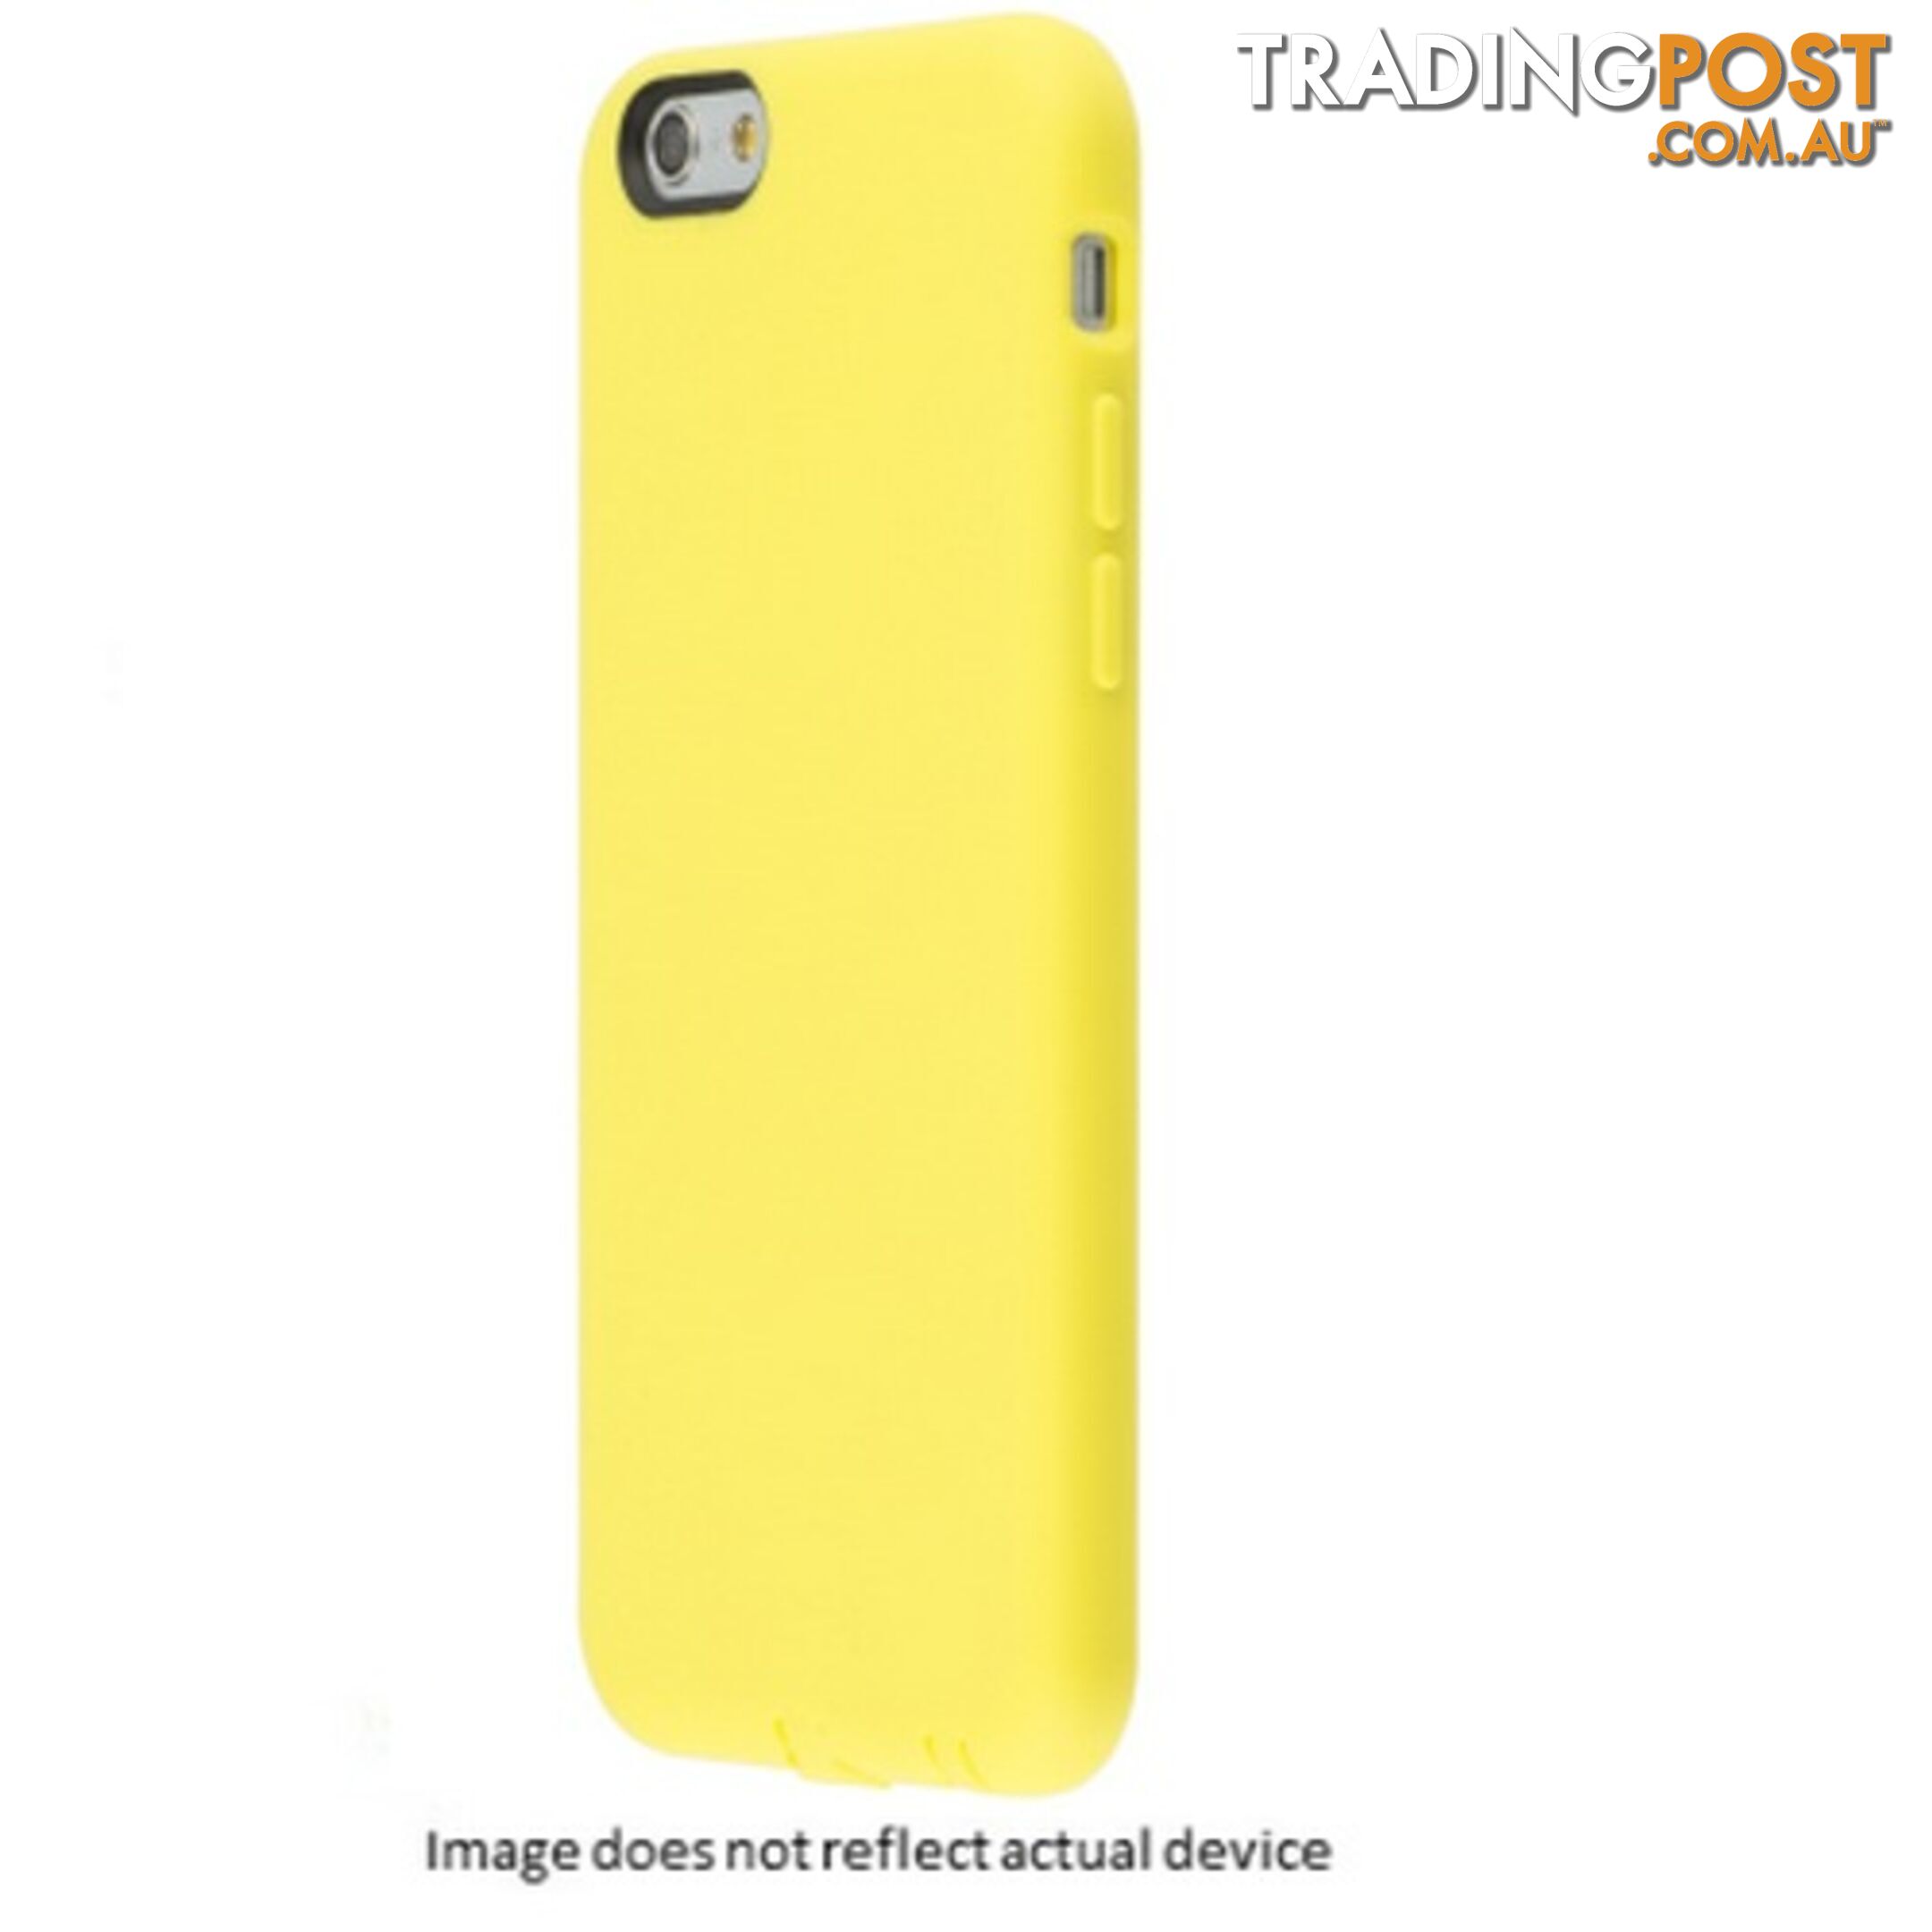 SwitchEasy Numbers Case suits iPhone 6 / 6S - Submarine Yellow - 4897017139511/AP-11-112-22 - SwitchEasy